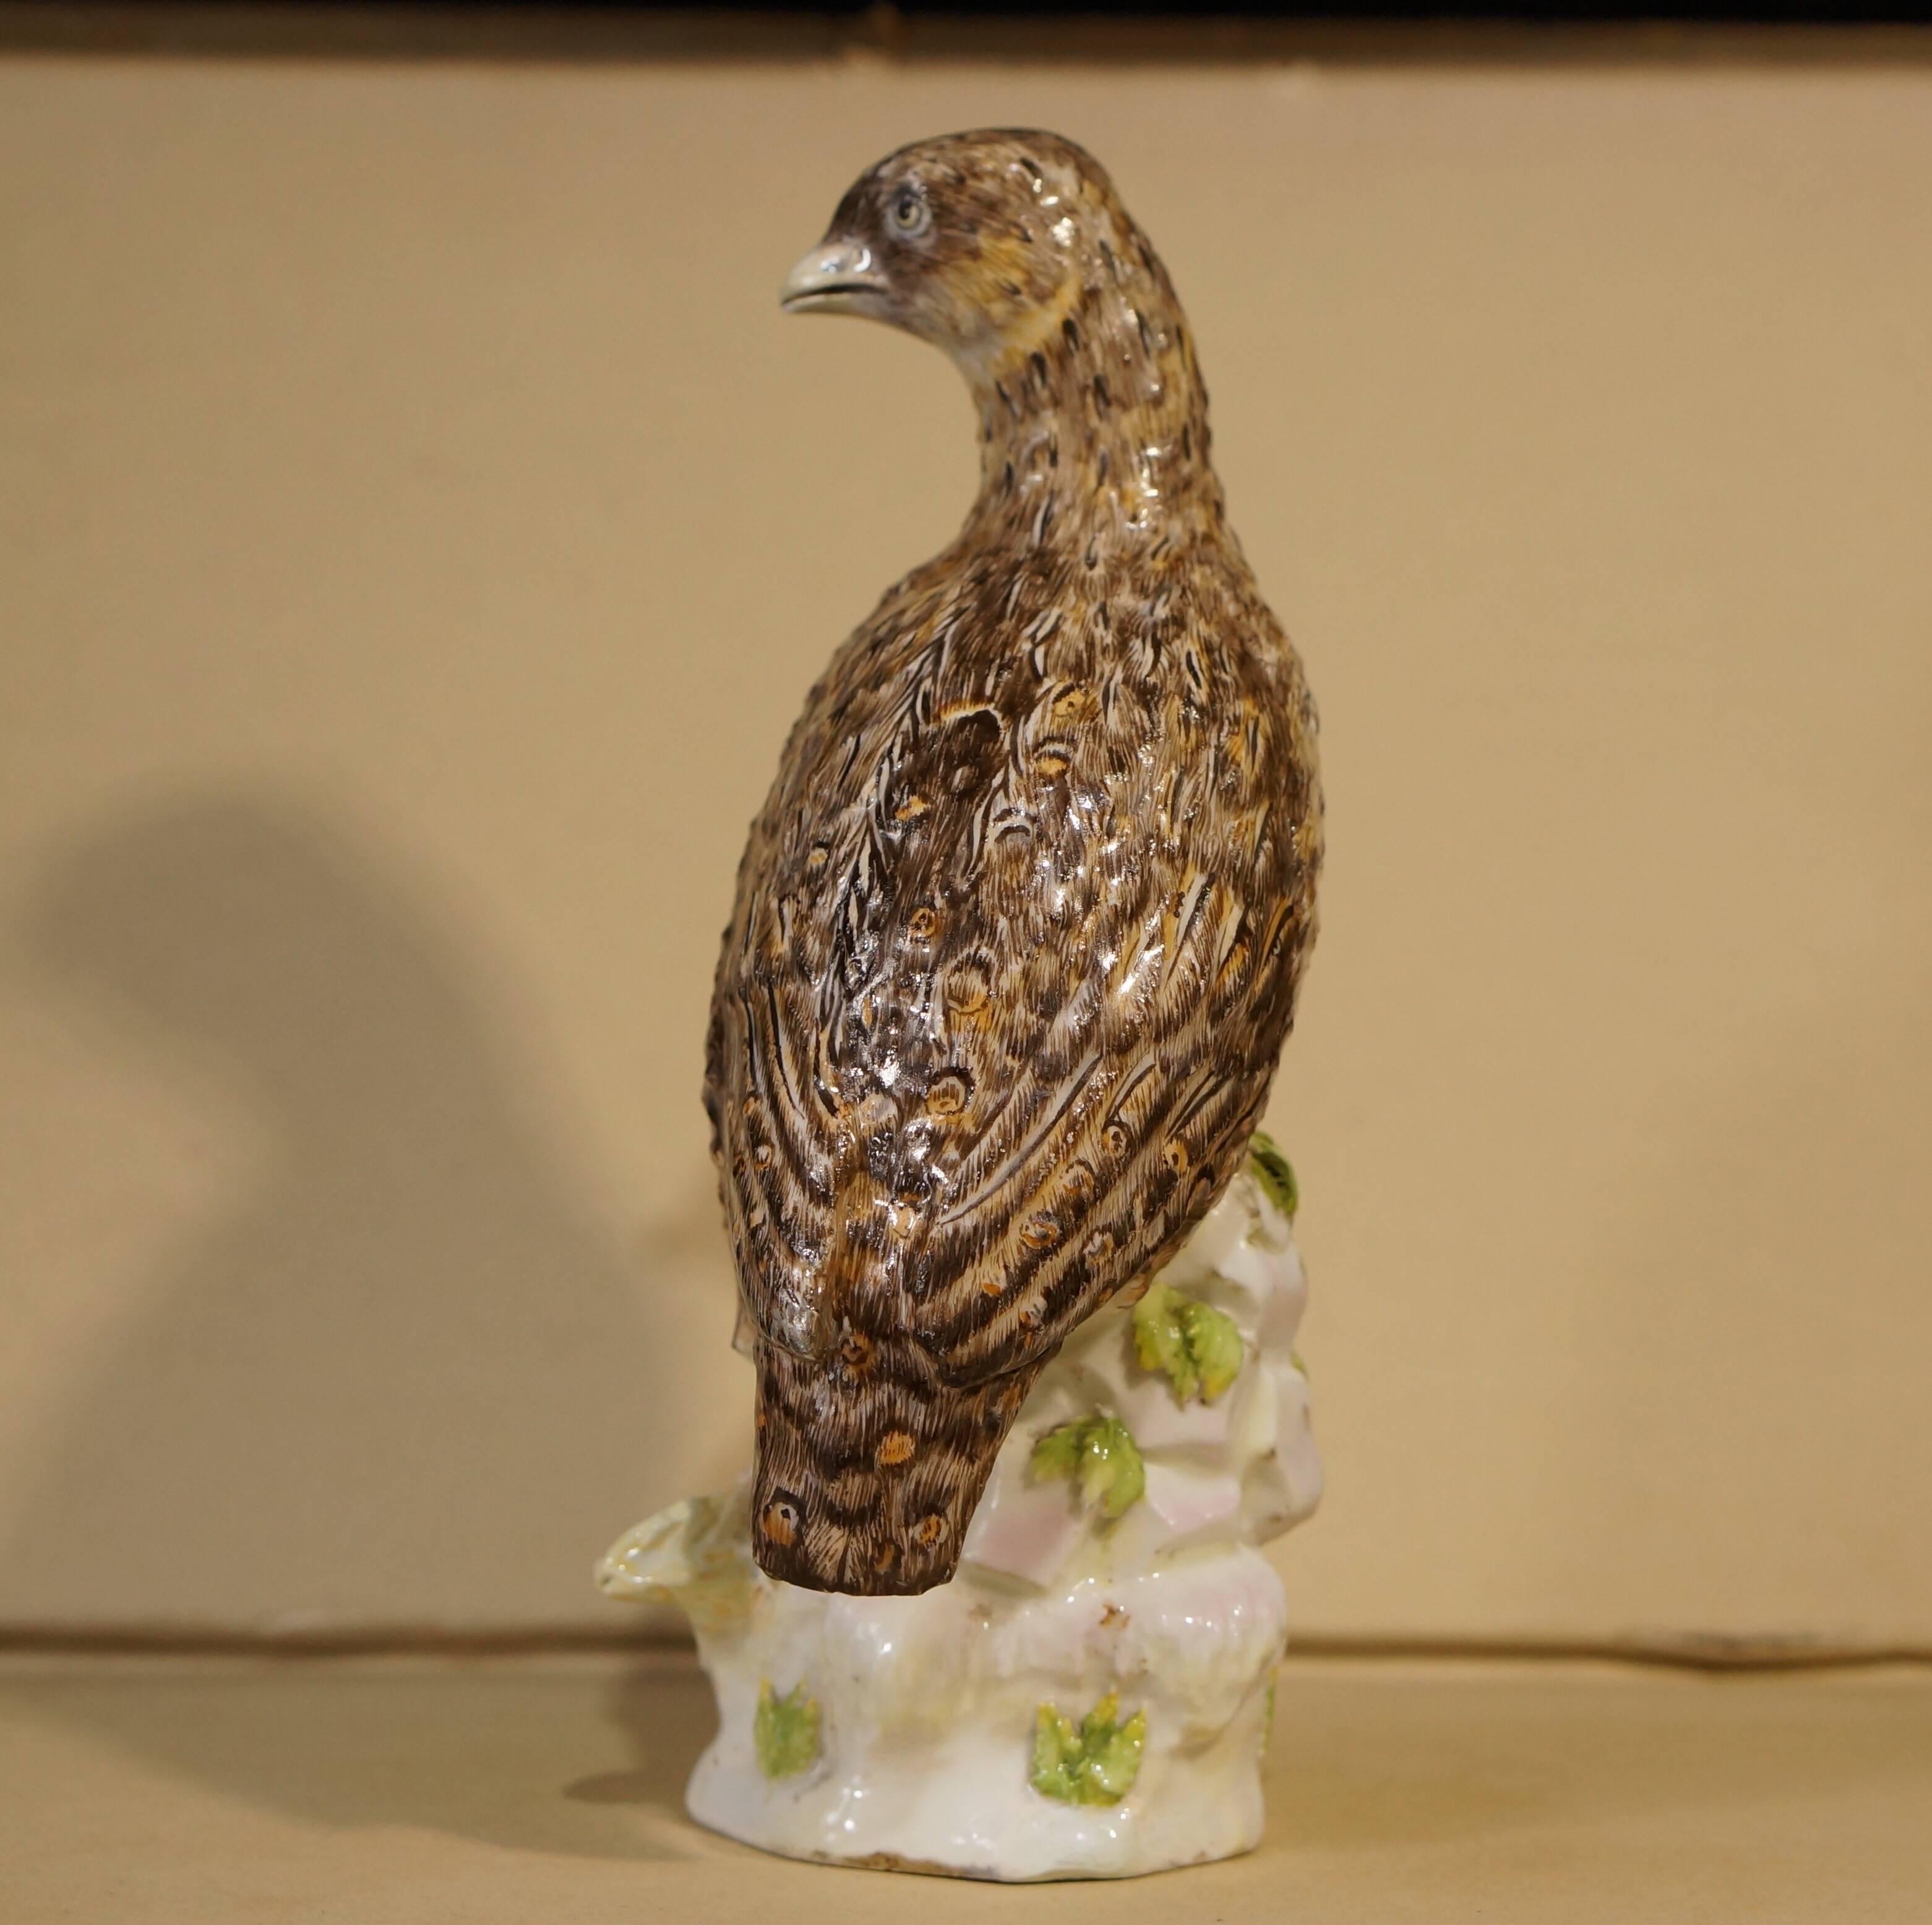 Rare early Wegely (Berlin) figure of a partridge, modelled standing on a rocky plinth with scattered leaves and a corn of wheat, the bird beautifully painted with mottled brown feathers including 'eyes'. 
Incised numbers '3.1.' 
circa